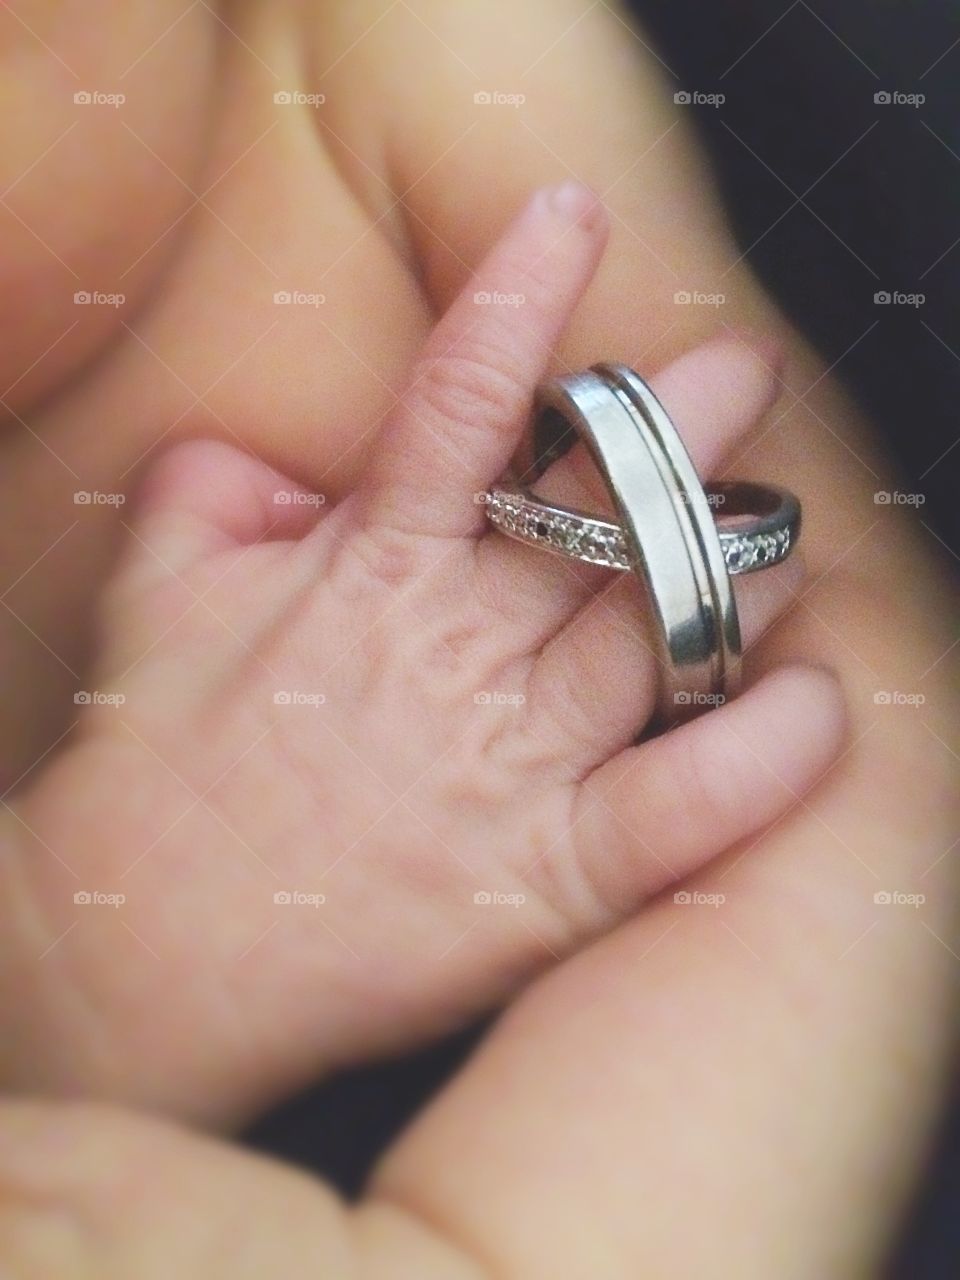 Newborn and parents wedding rings